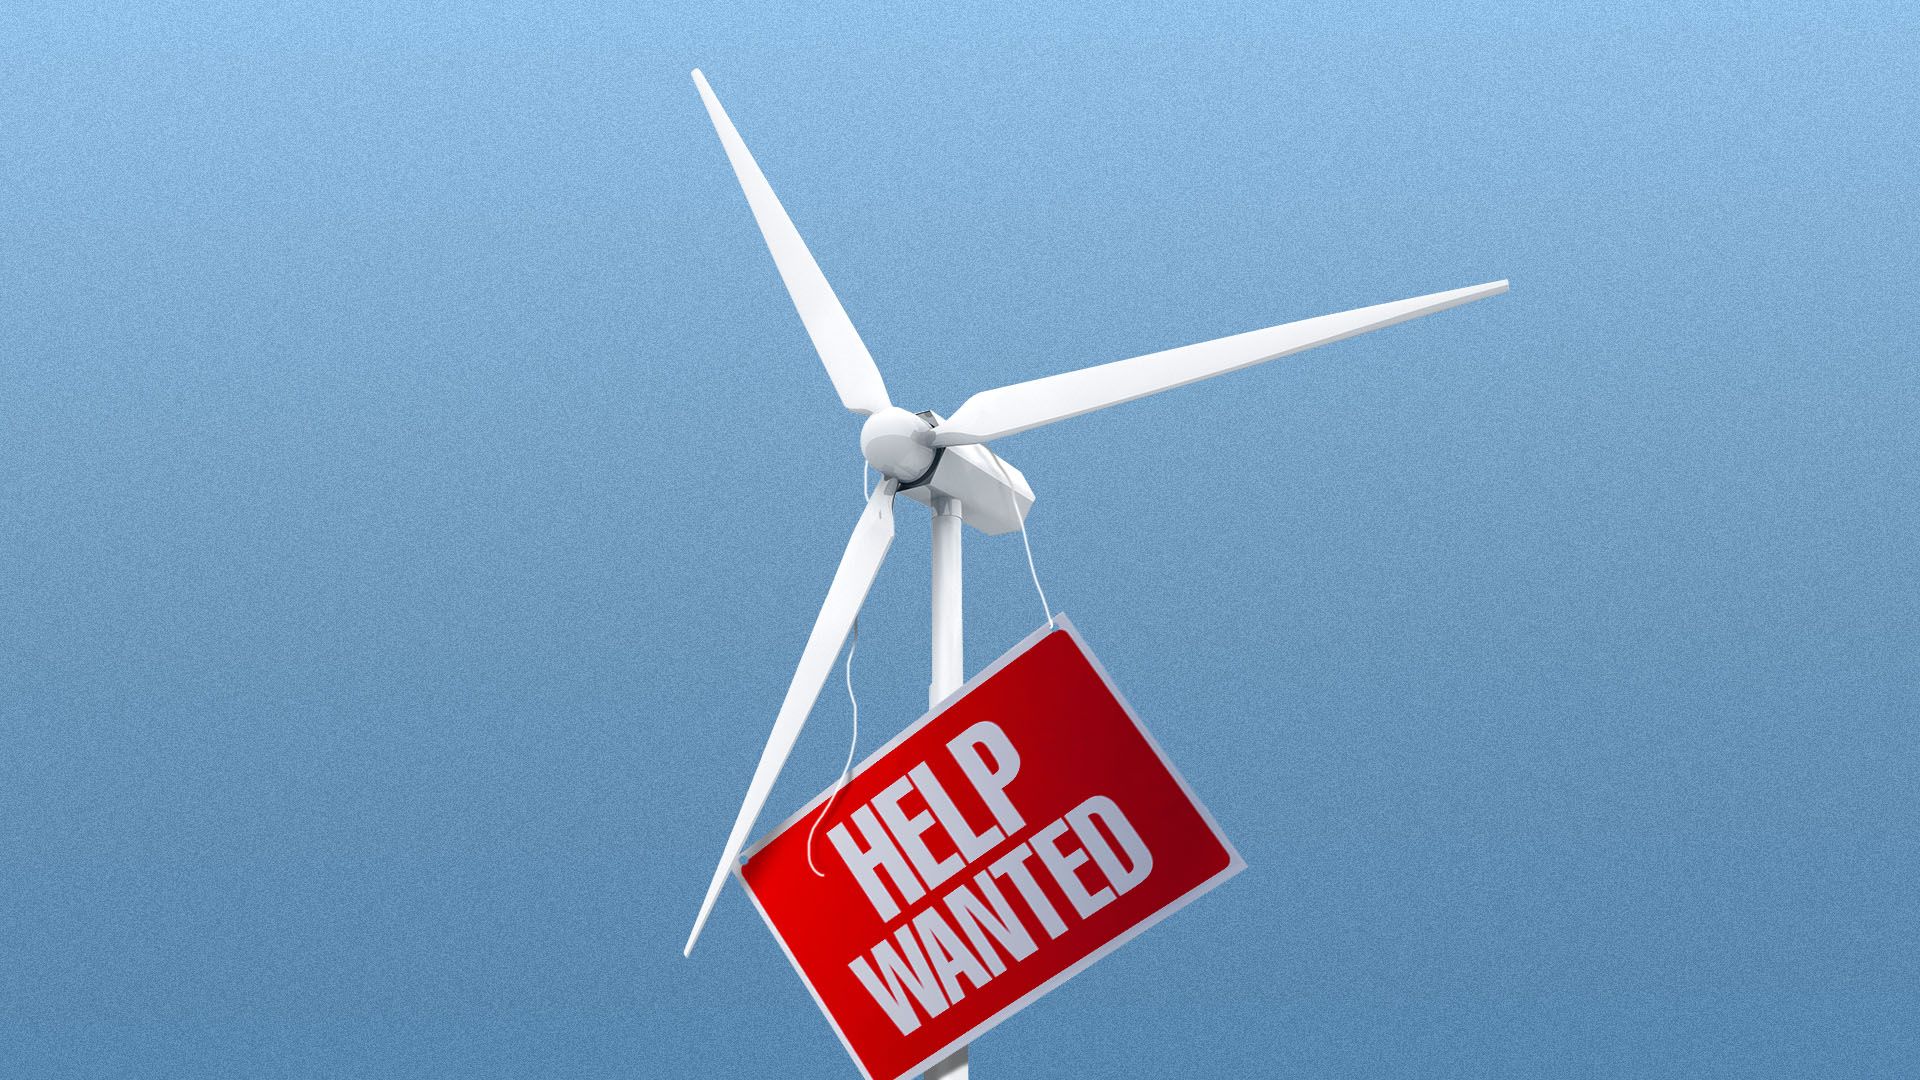  Illustration of a wind turbine with a help wanted sign falling off it.